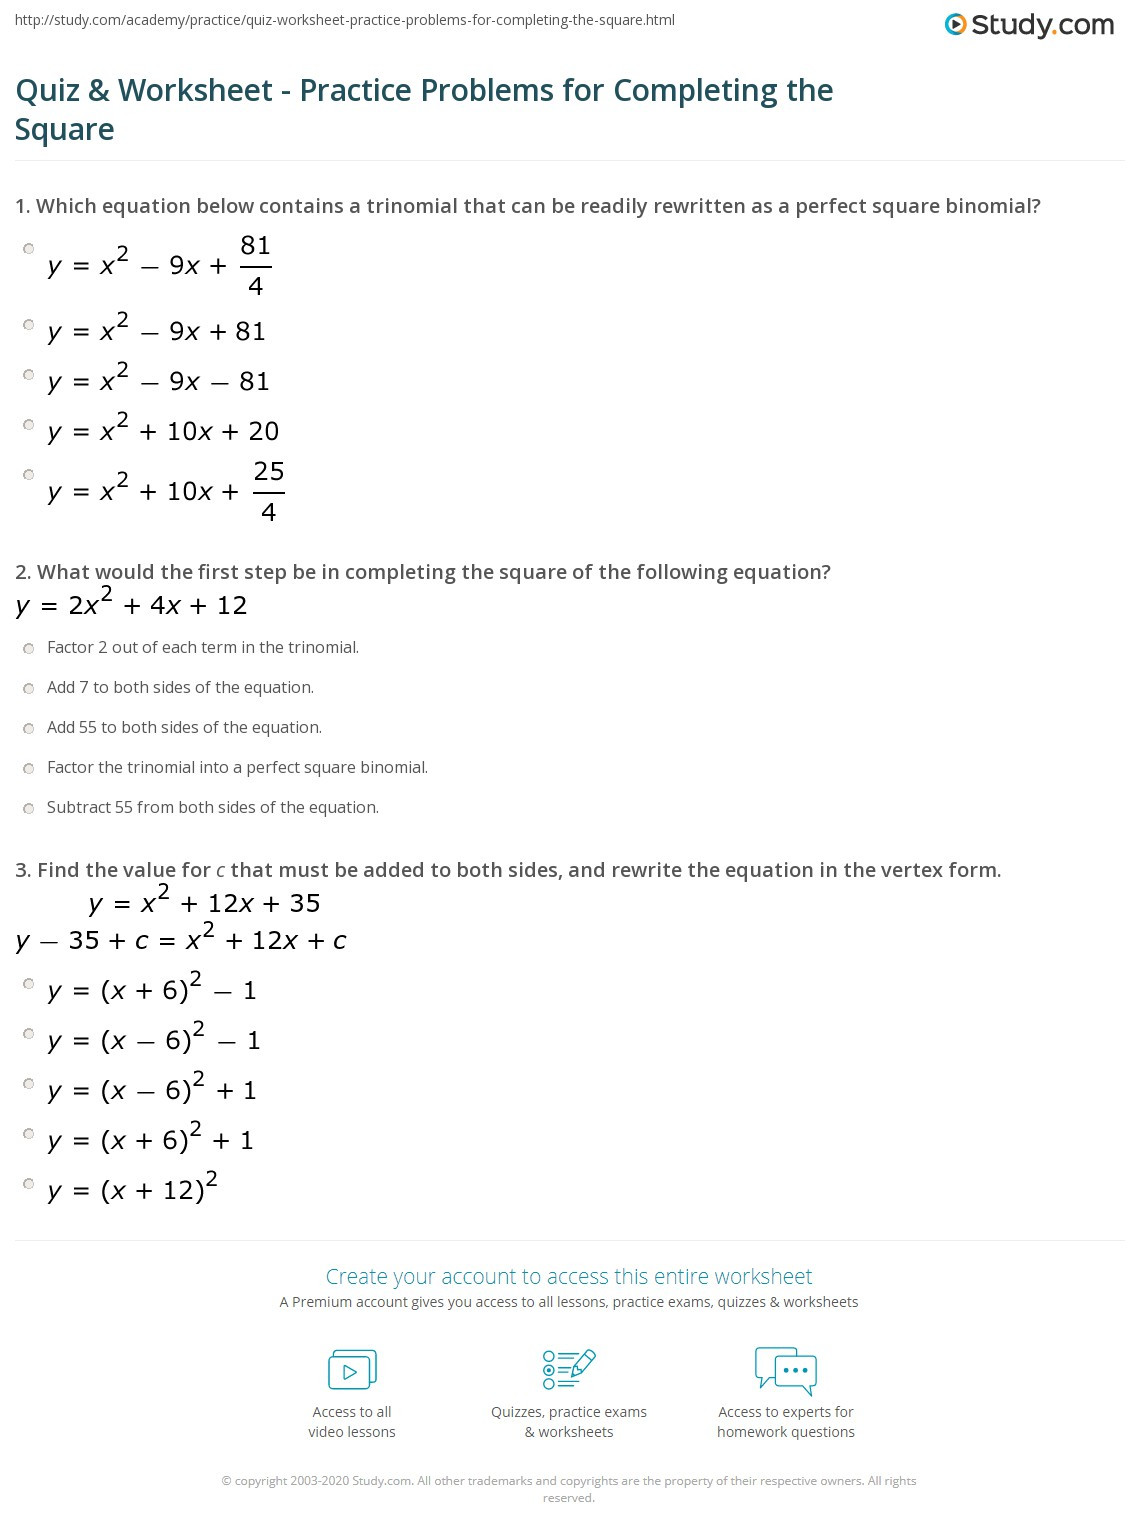 Completing the Square Practice Worksheet Quiz &amp; Worksheet Practice Problems for Pleting the